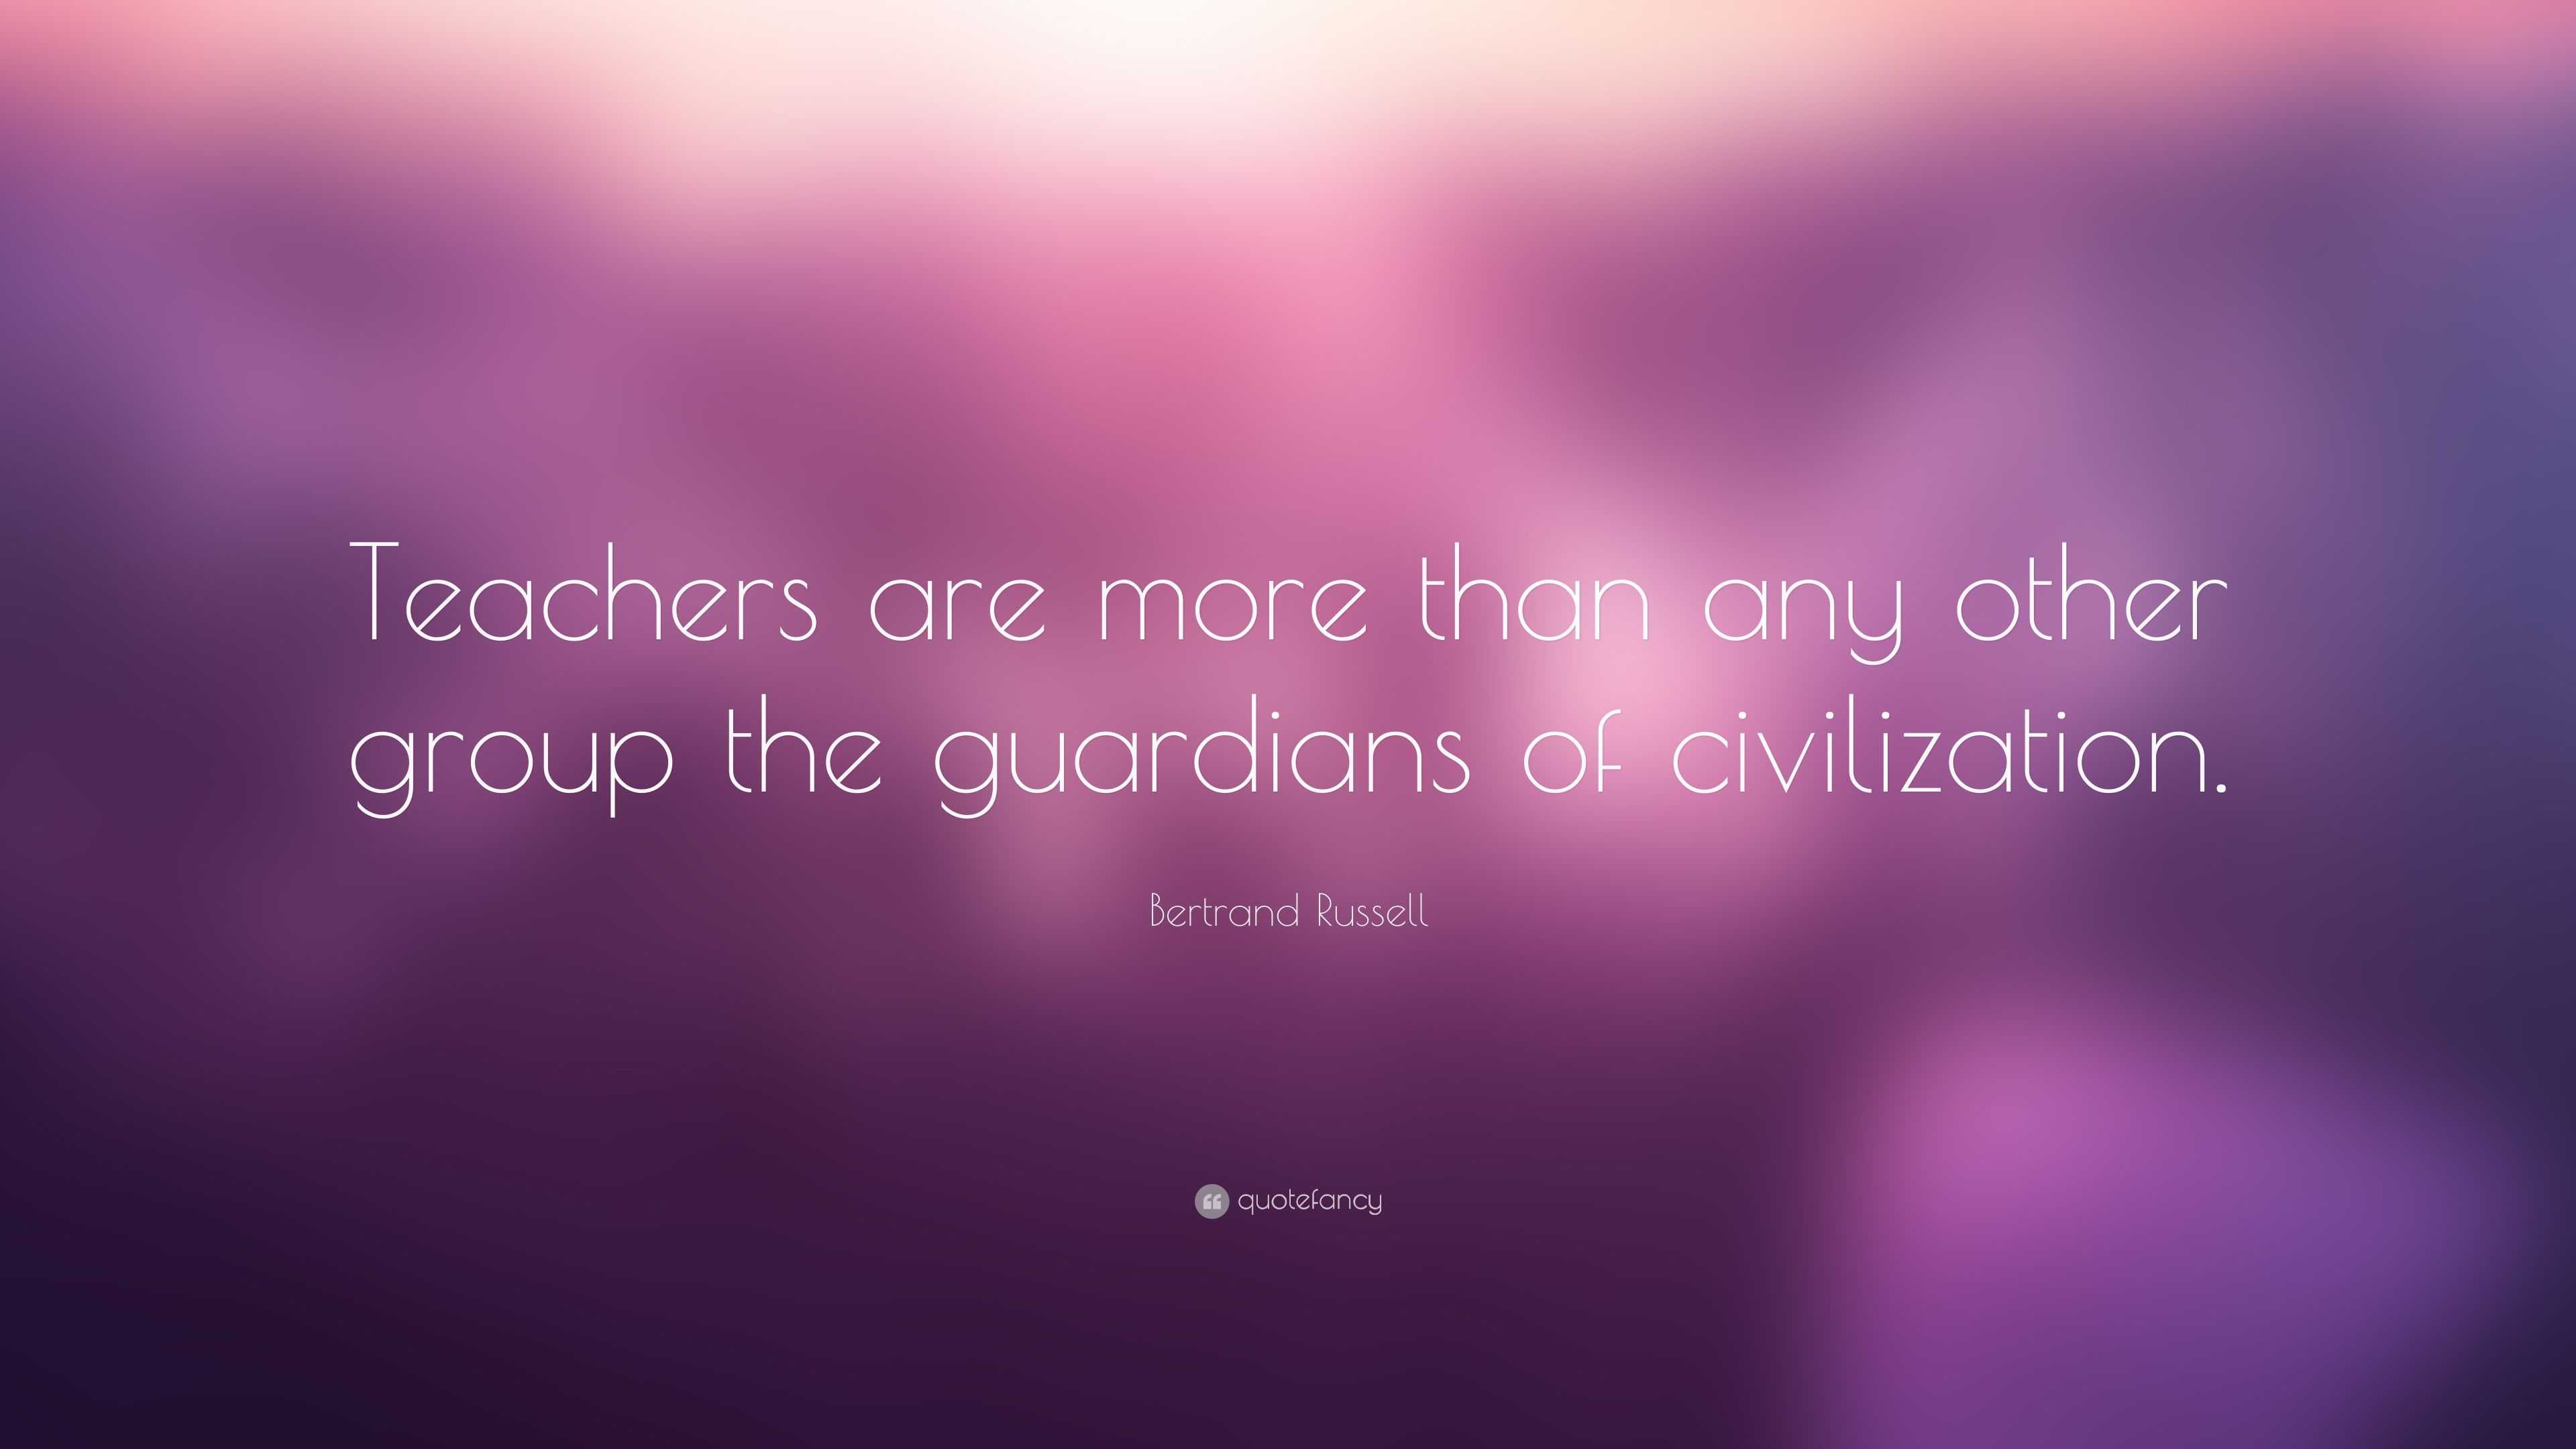 Bertrand Russell Quote: “Teachers are more than any other group the ...